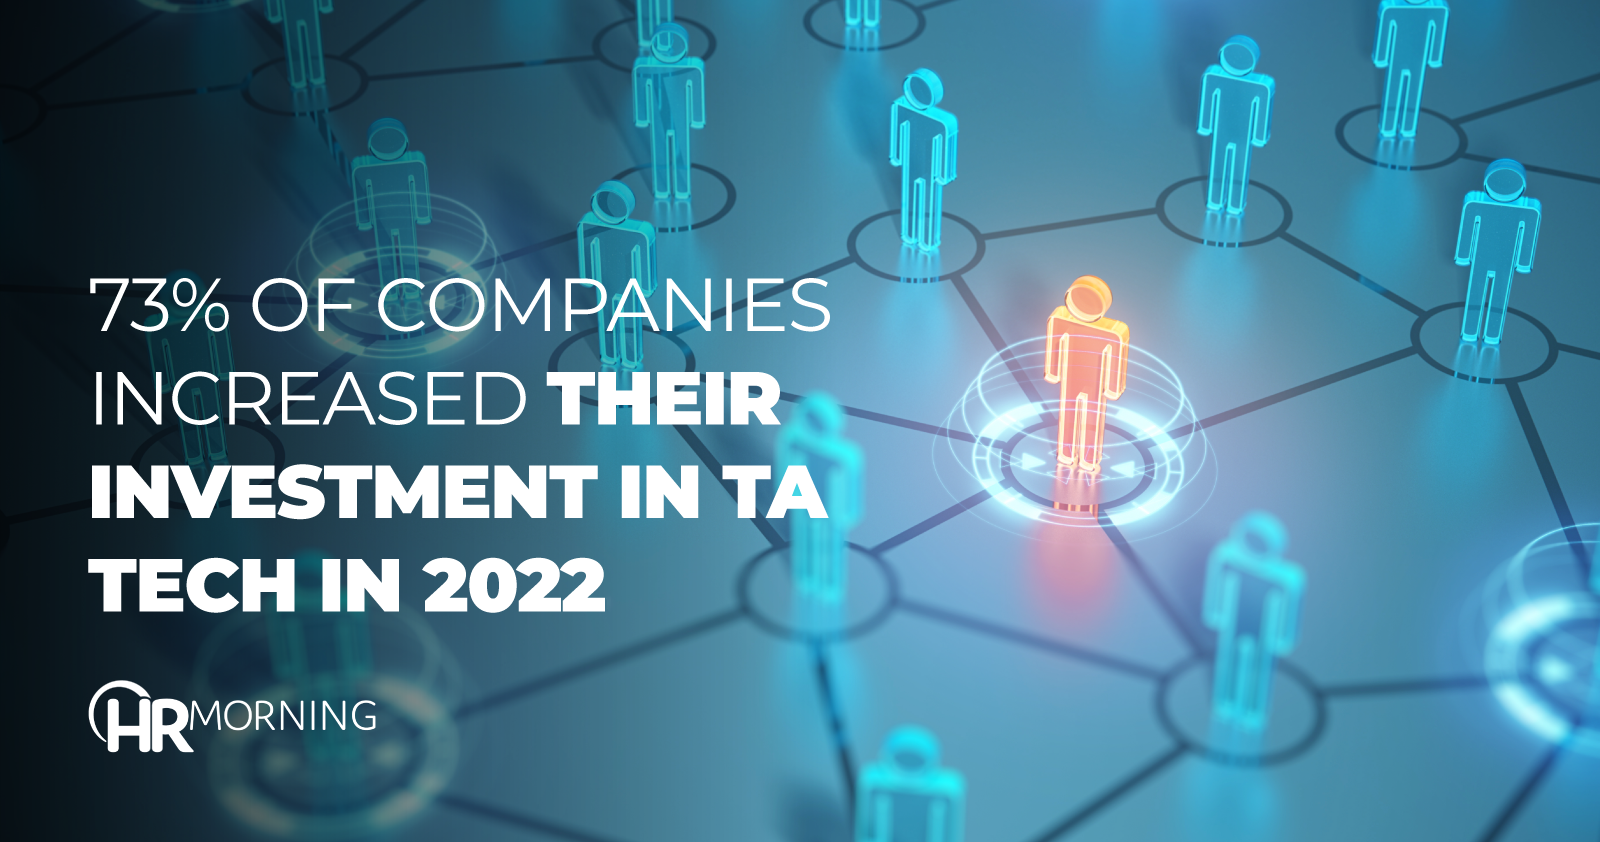 73% Of Companies Increased Their Investment In TA Tech In 2022